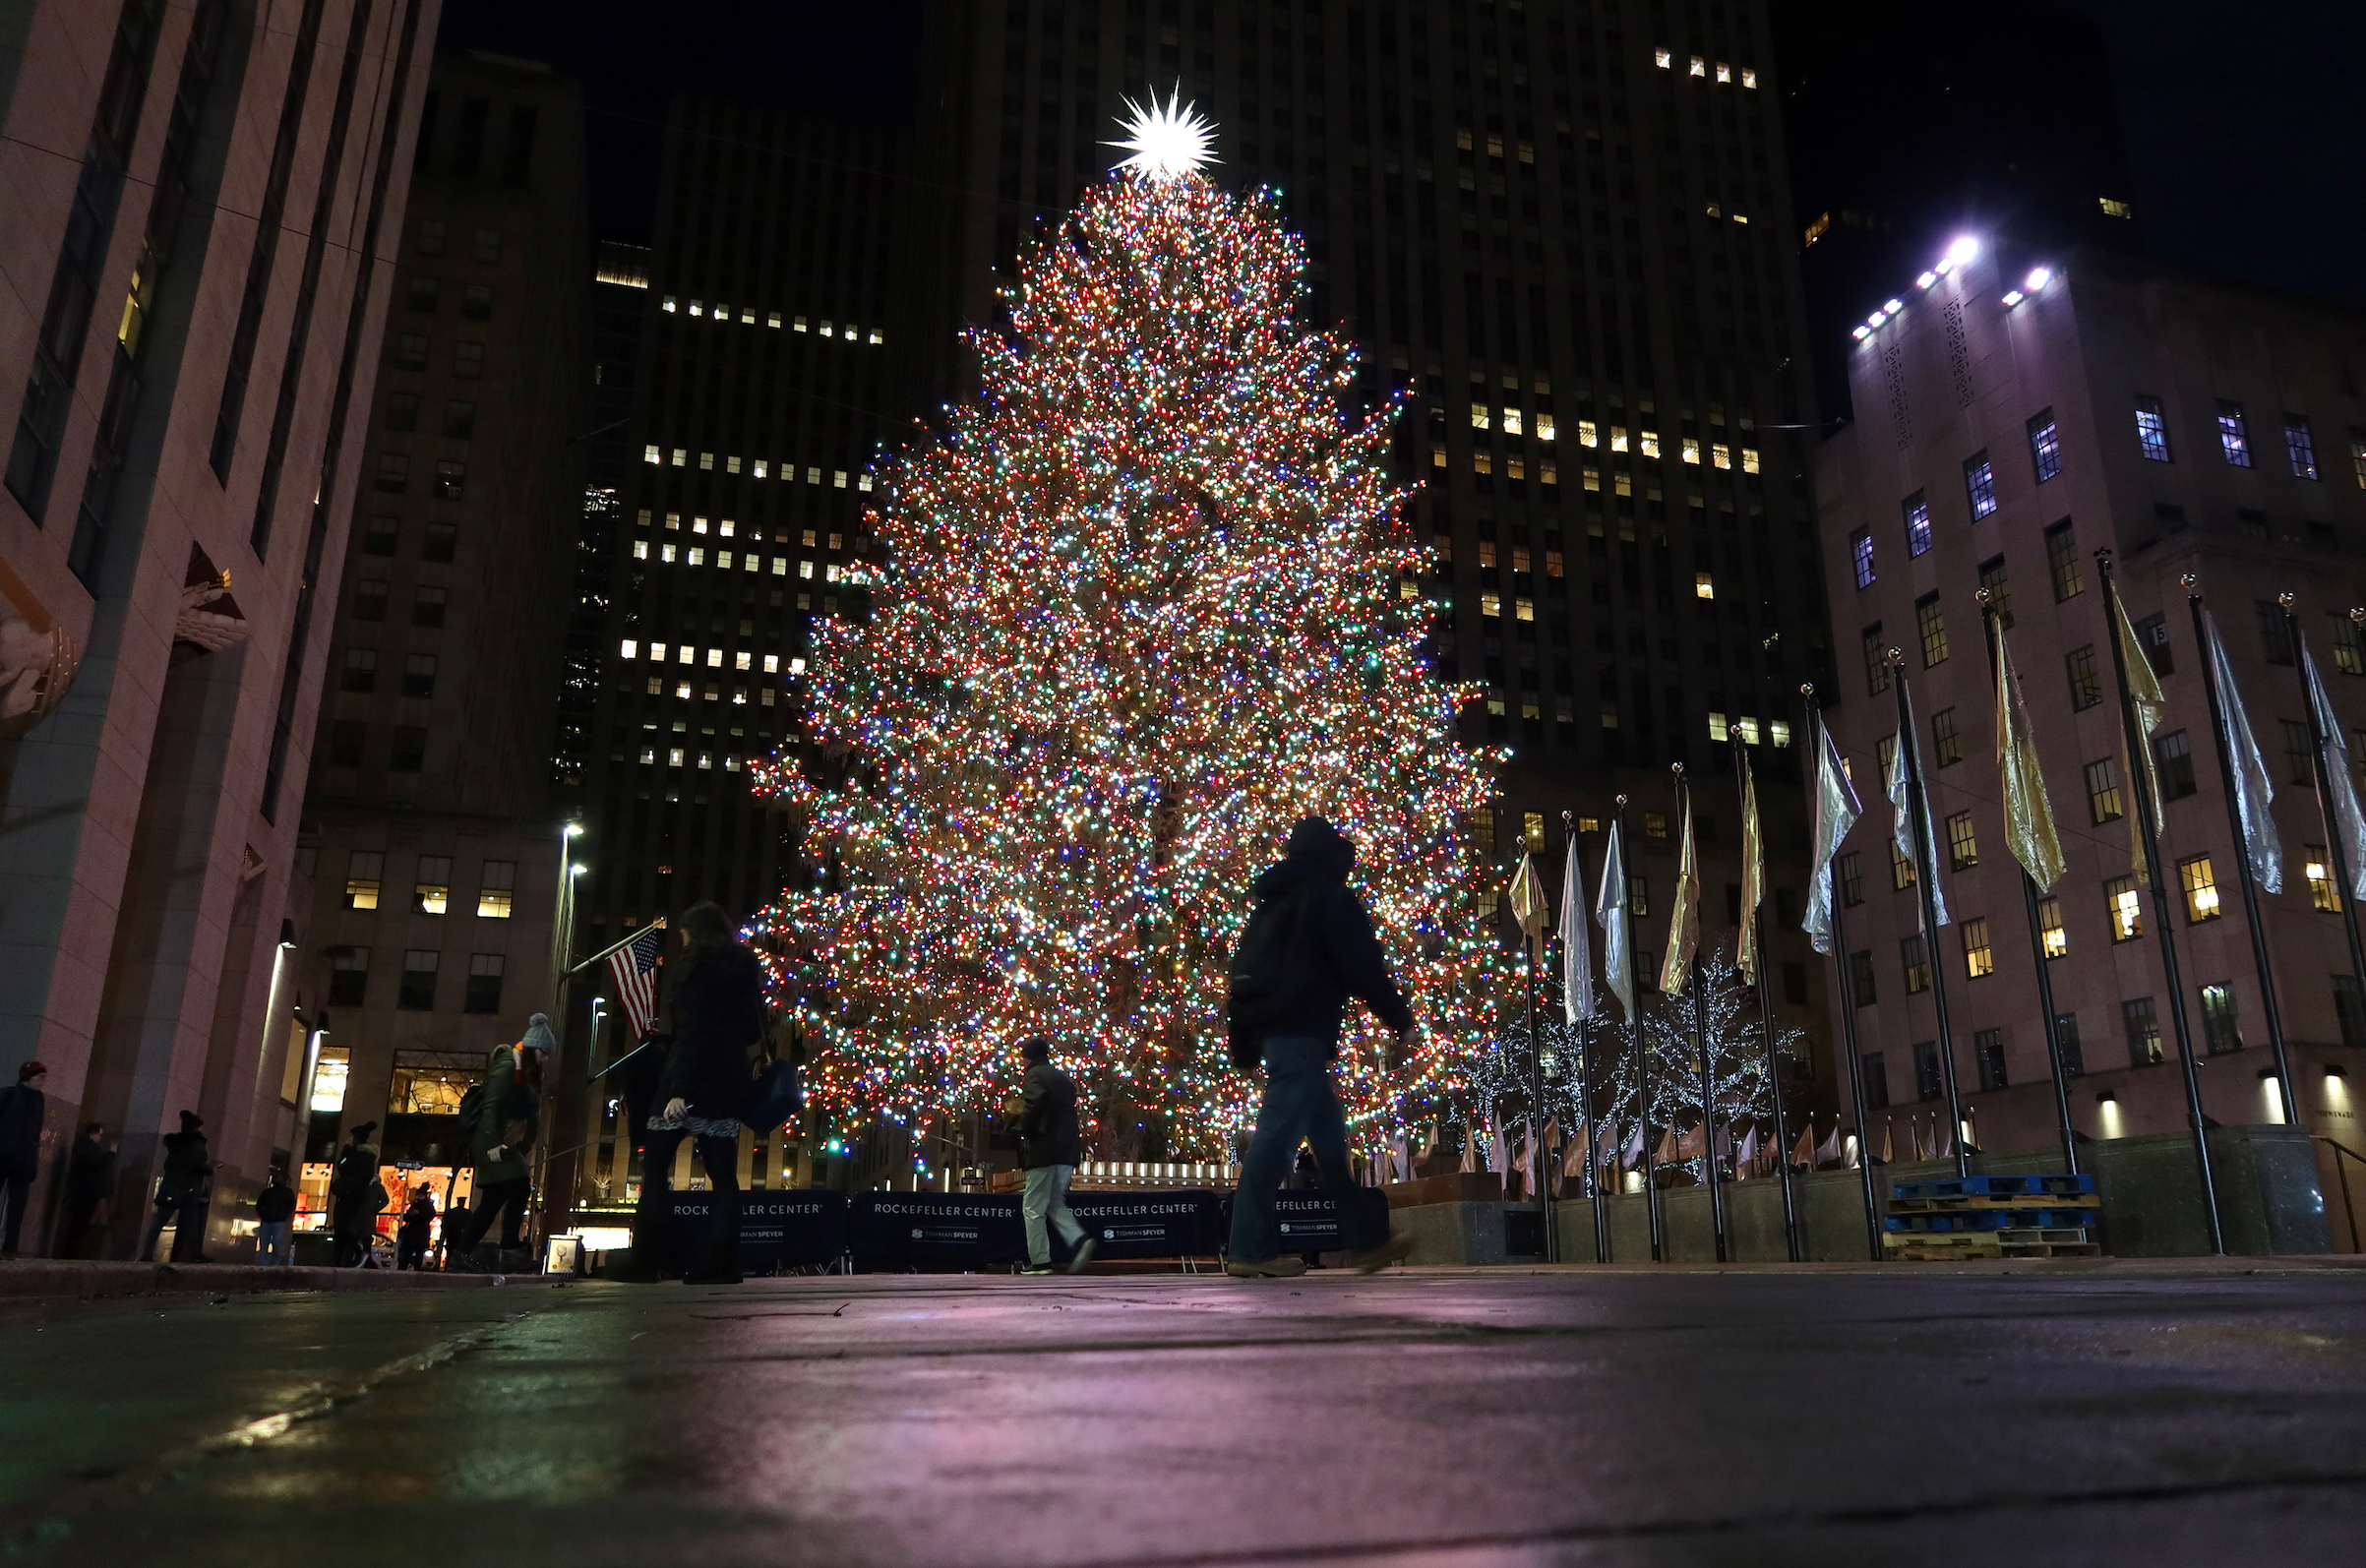 A man walks past the Christmas tree in Rockefeller Center before sunrise on Dec. 5, 2019, in New York City. (Gary Hershorn—Getty Images)